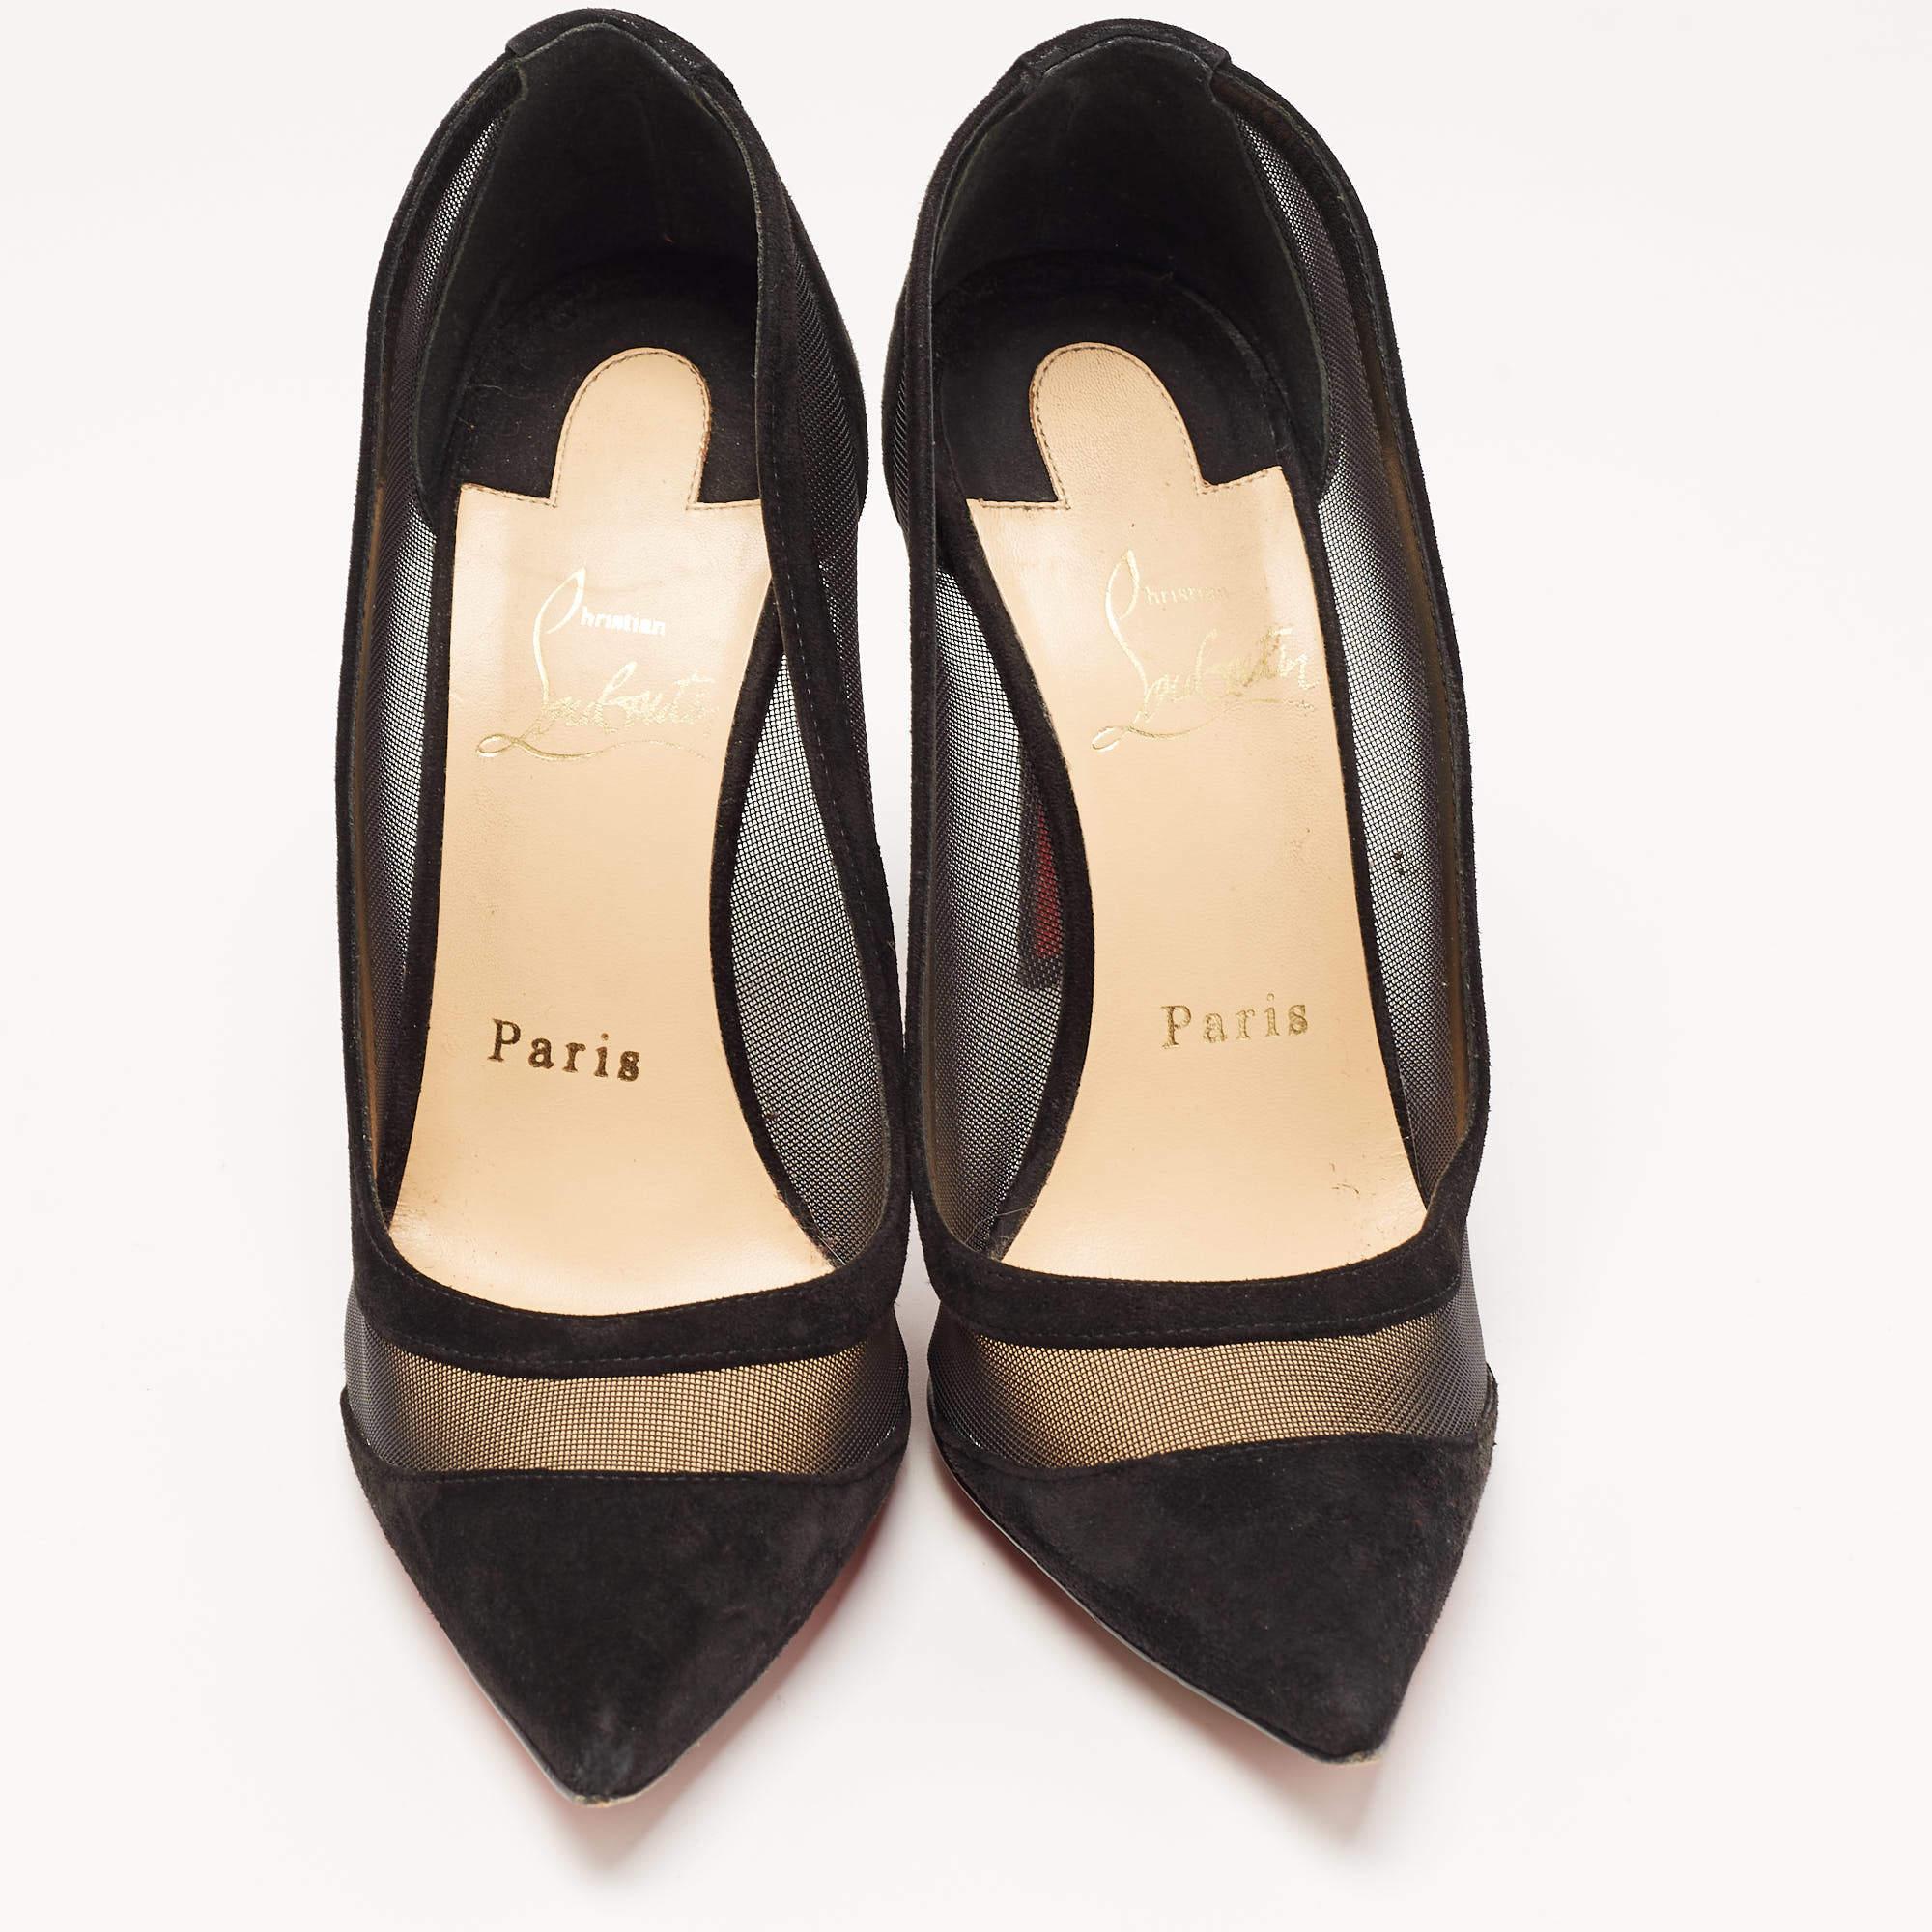 Make a statement with these designer pumps for women. Impeccably crafted, these chic heels offer both fashion and comfort, elevating your look with each graceful step.

Includes: Original Dustbag

